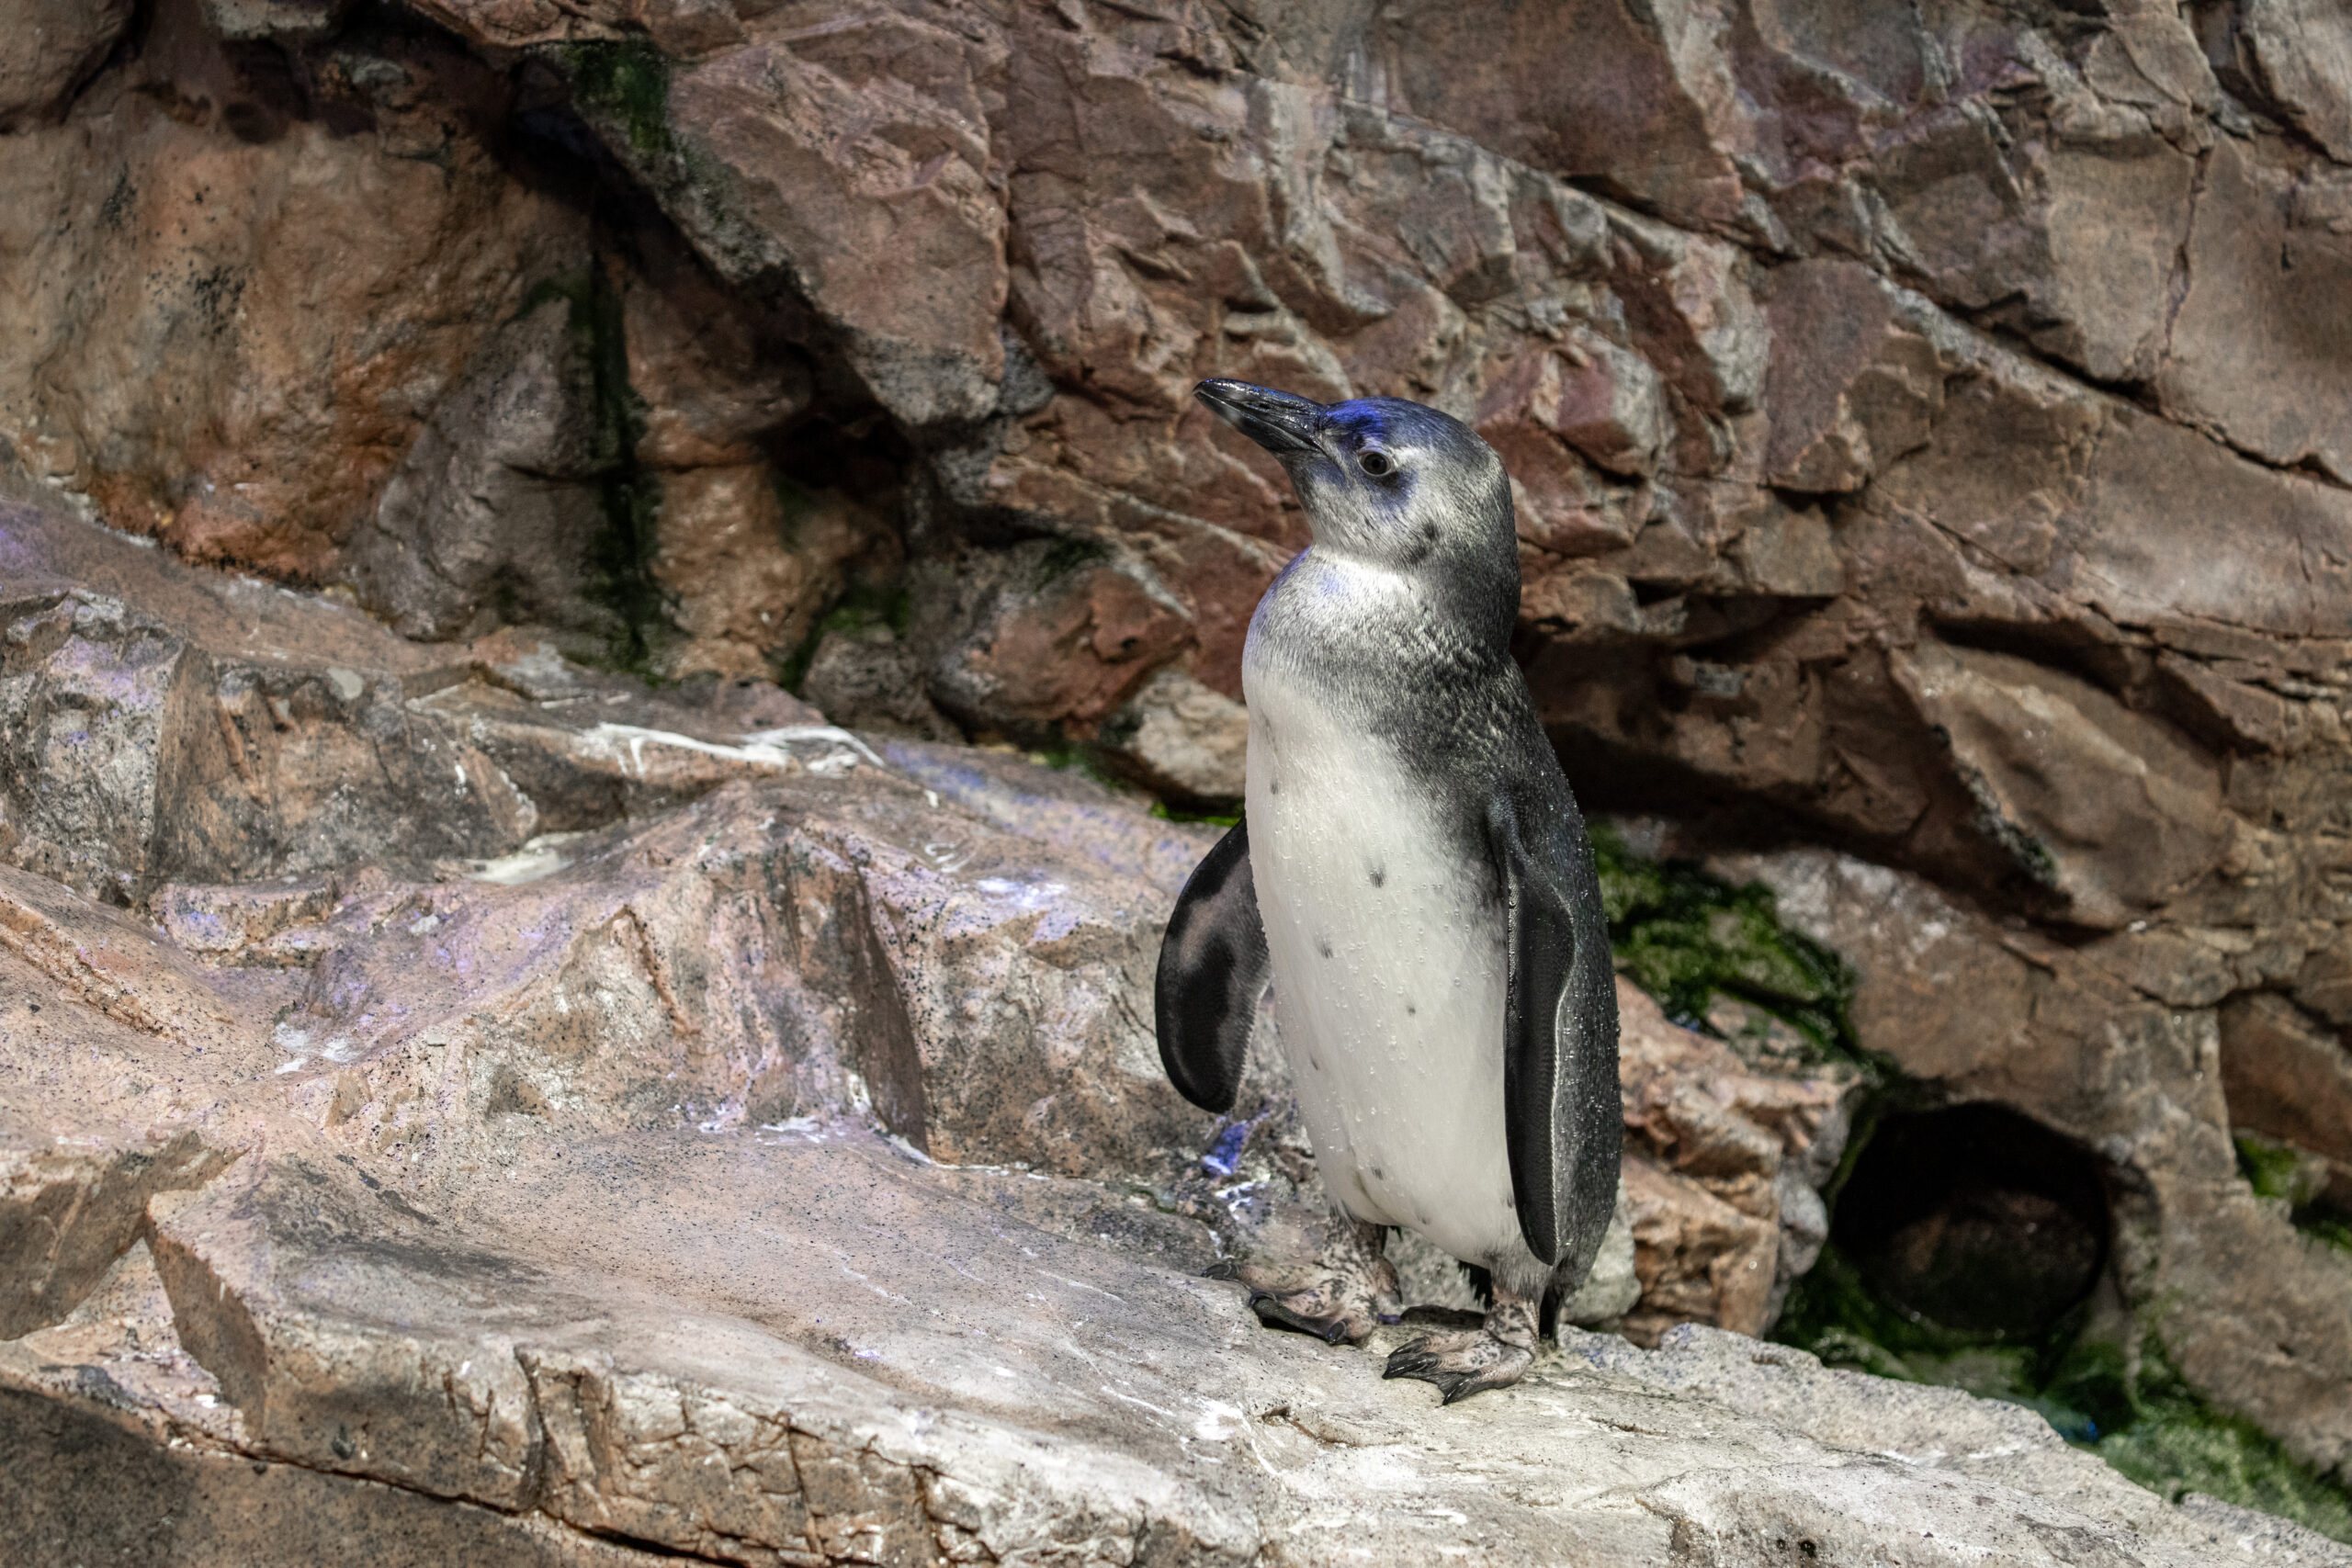 African penguin chick “Althea” joining the colony on exhibit.